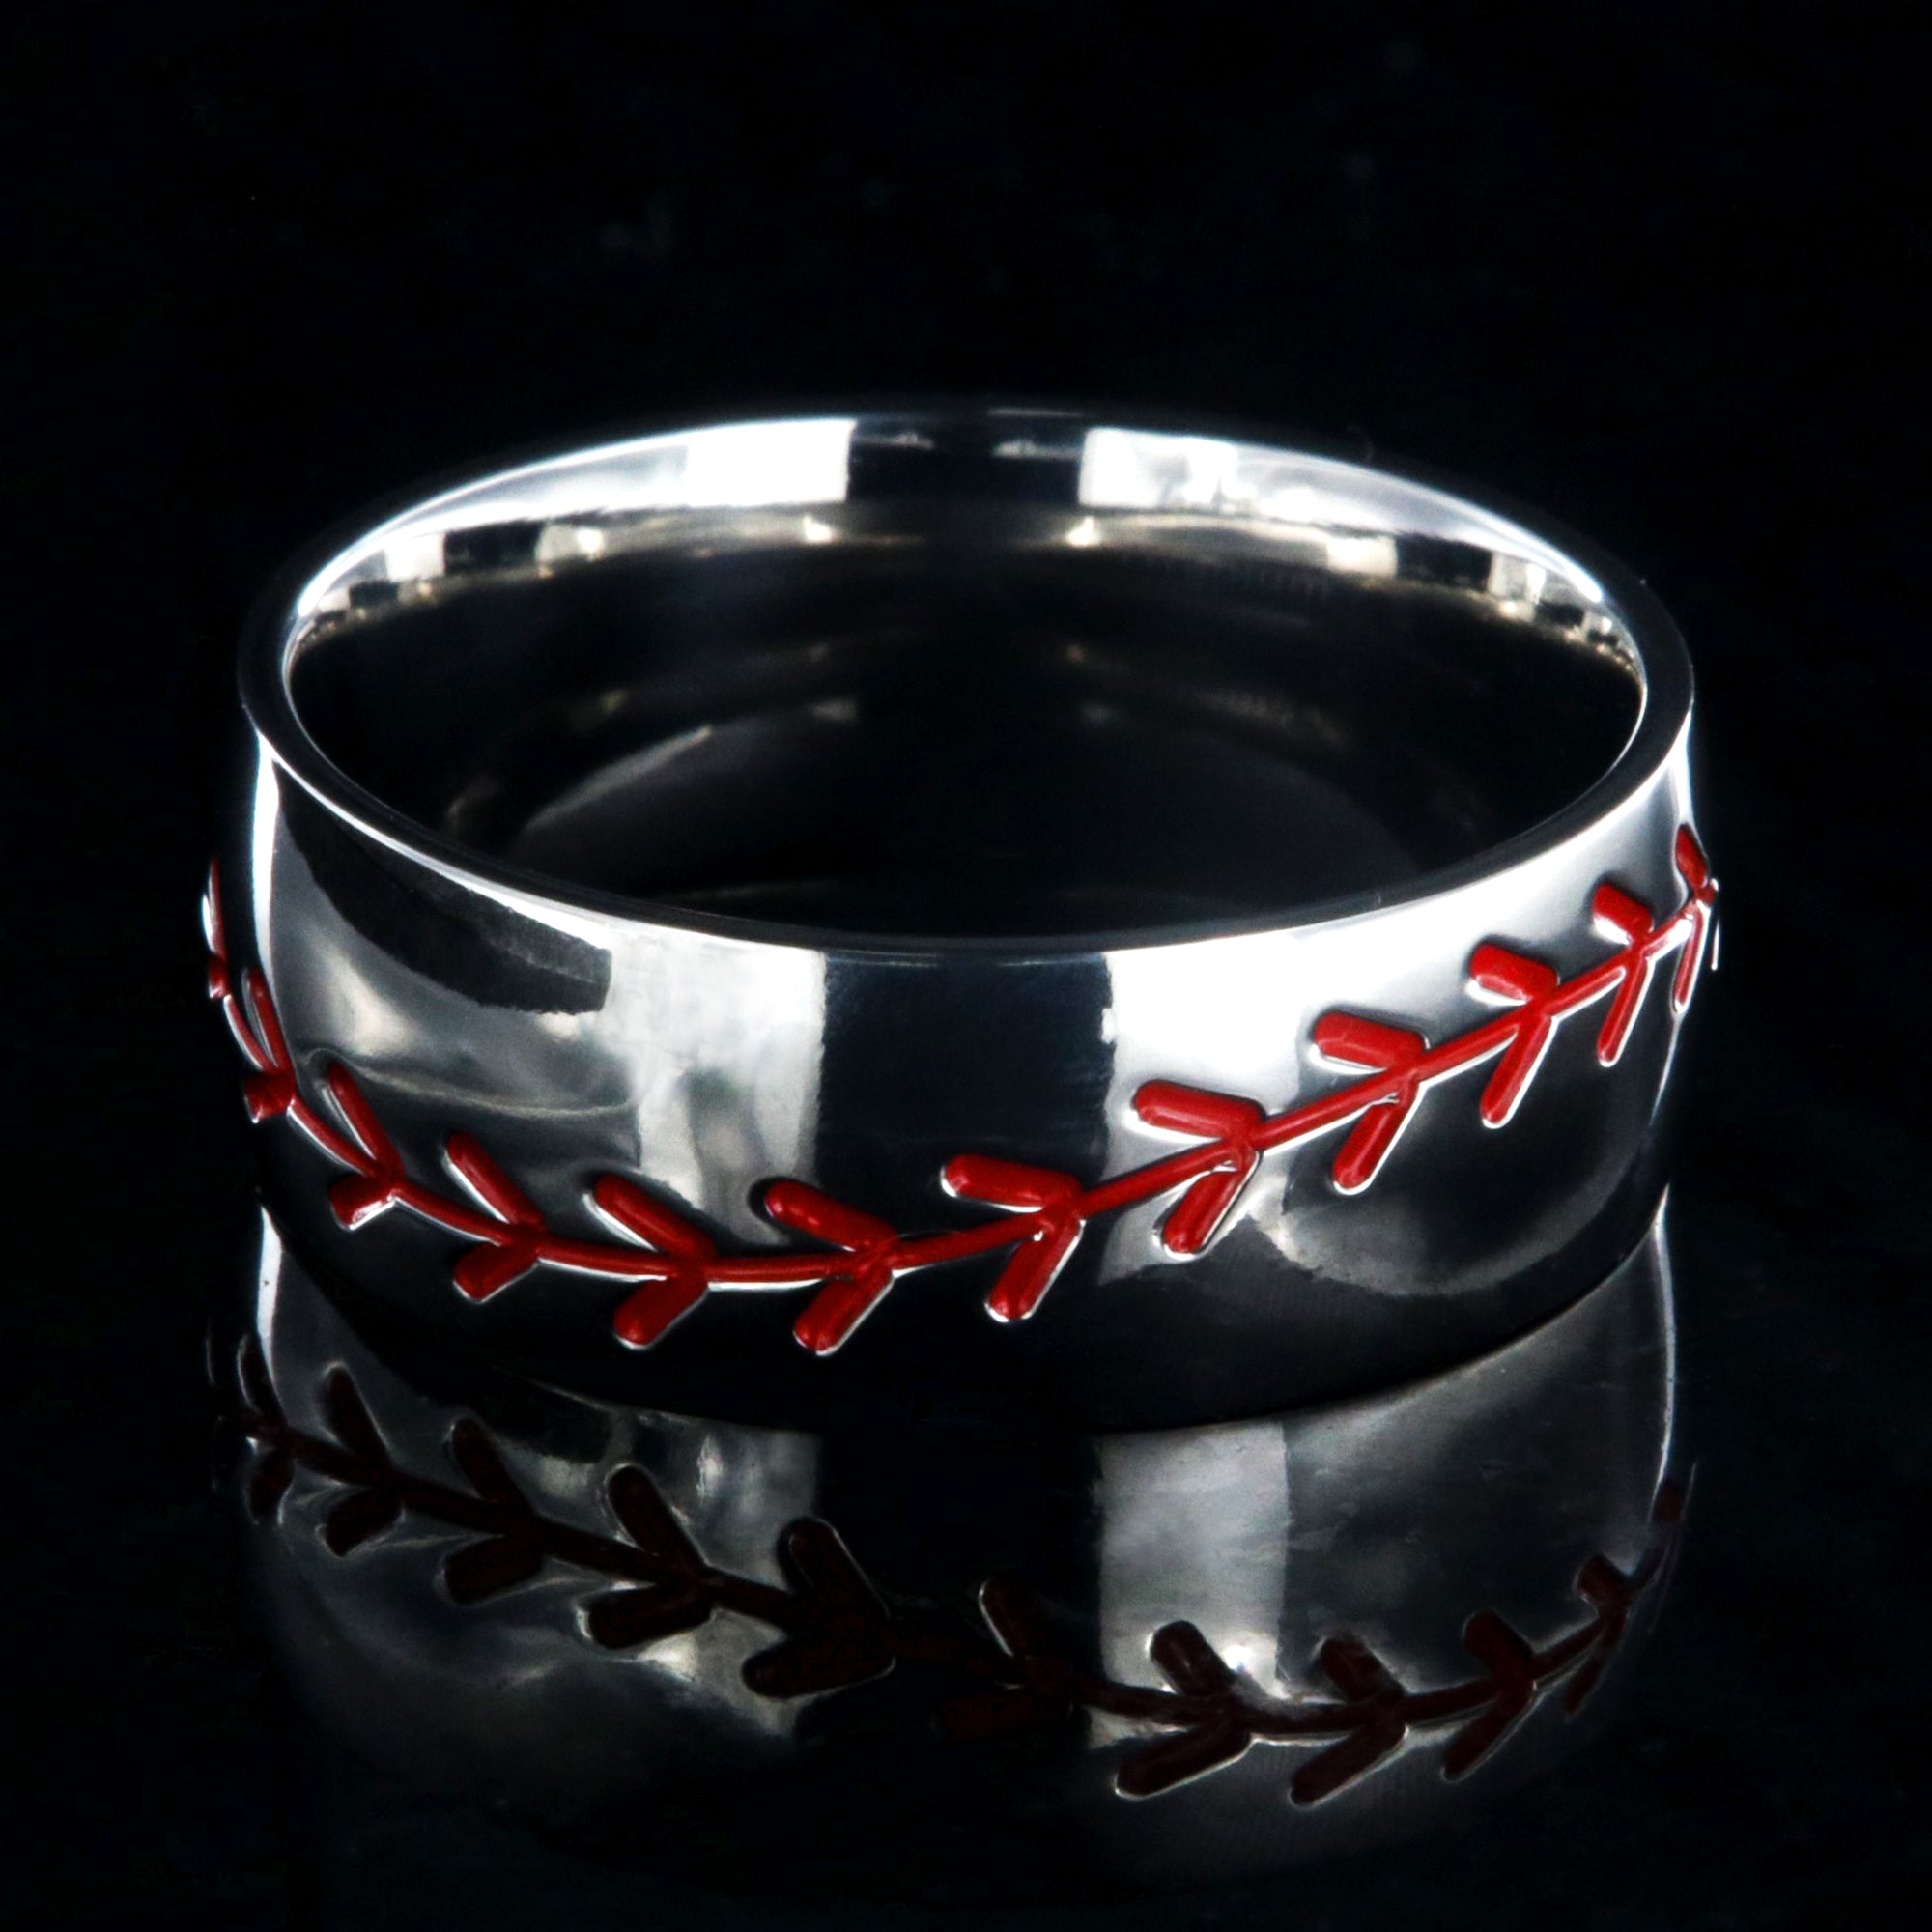 8mm wide titanium baseball ring with red stitching and a rounded profile